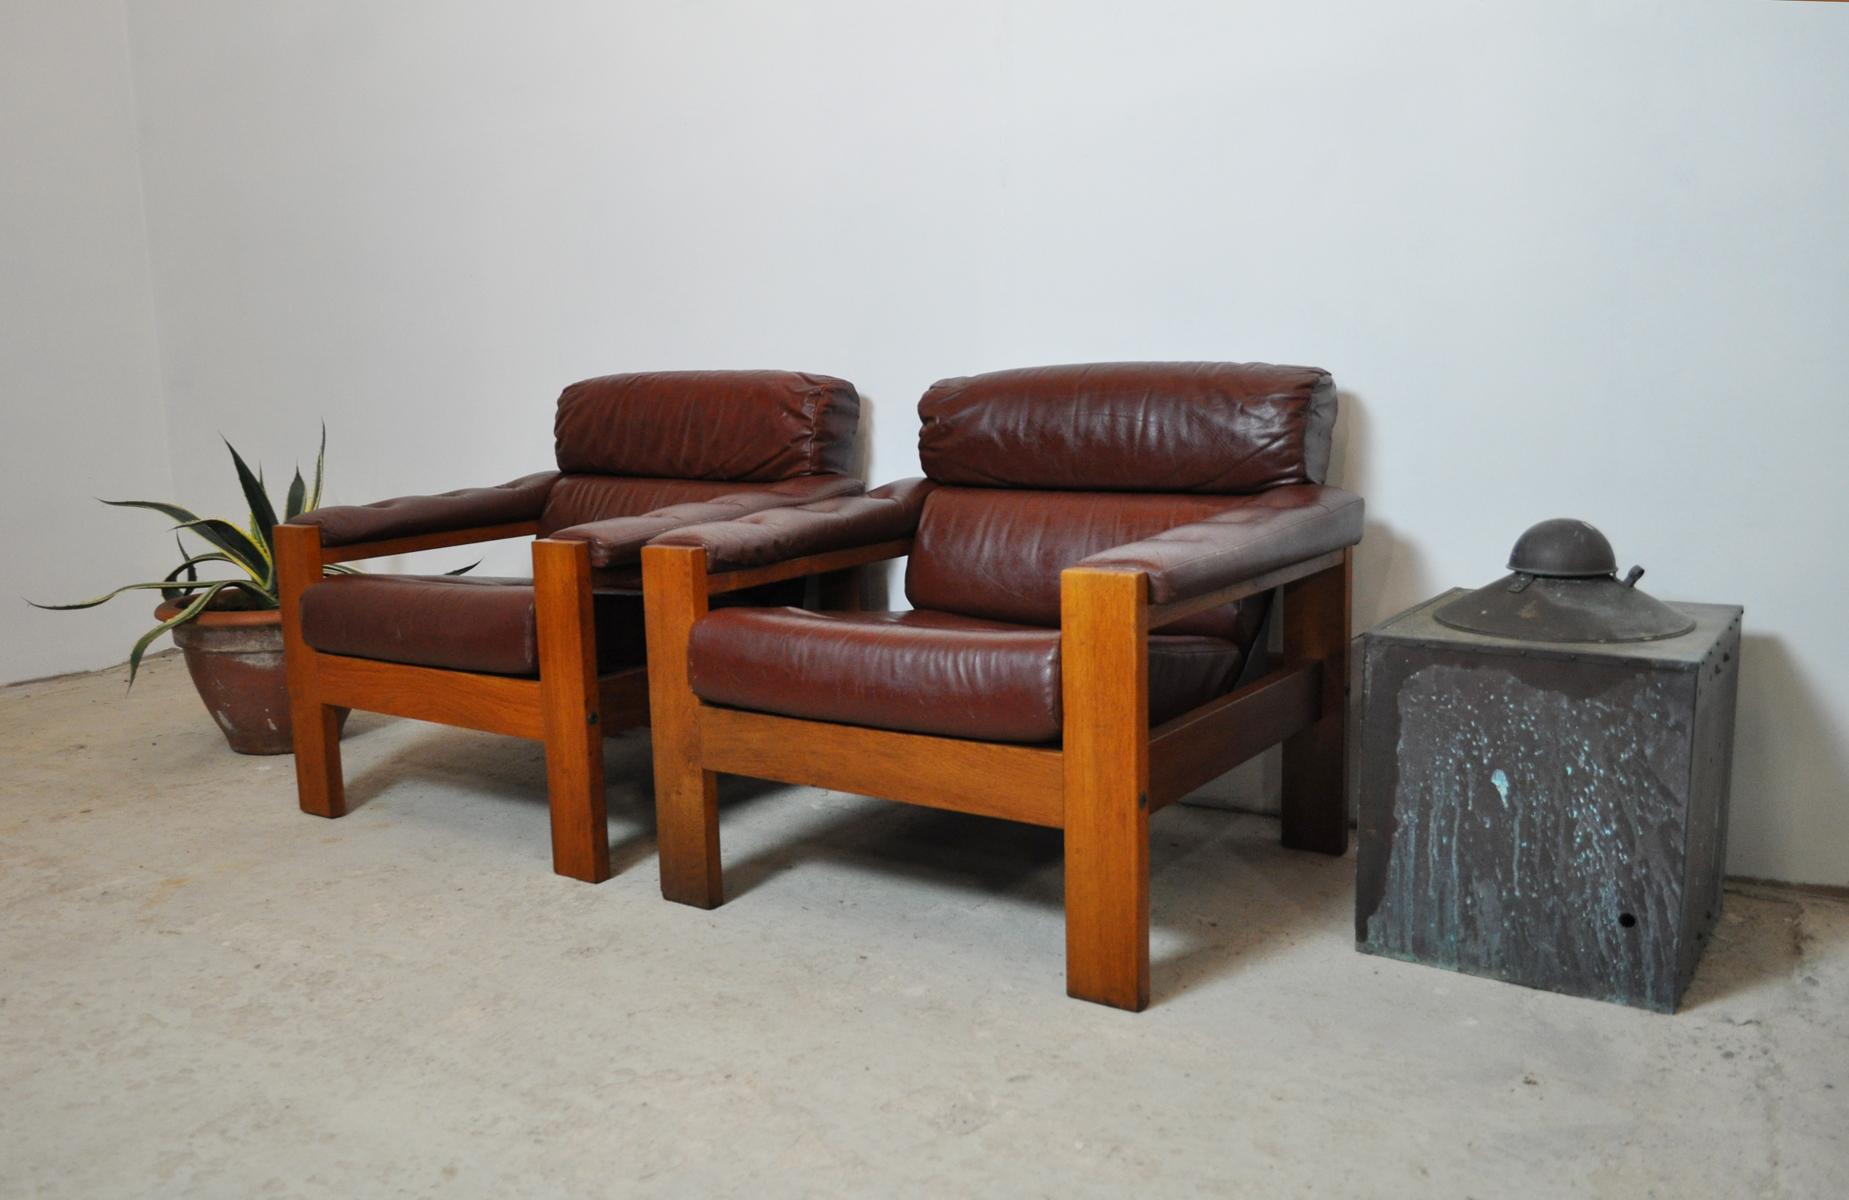 Stunning pair of Scandinavian arm lounge chairs from the 1970s. Leather upholstery and solid oak frame with a warm patinated color, superior quality.

Measures:
45 H x 81 W x 72 D cm
Seat height: 41 cm.

Signs of wear consistent with age and